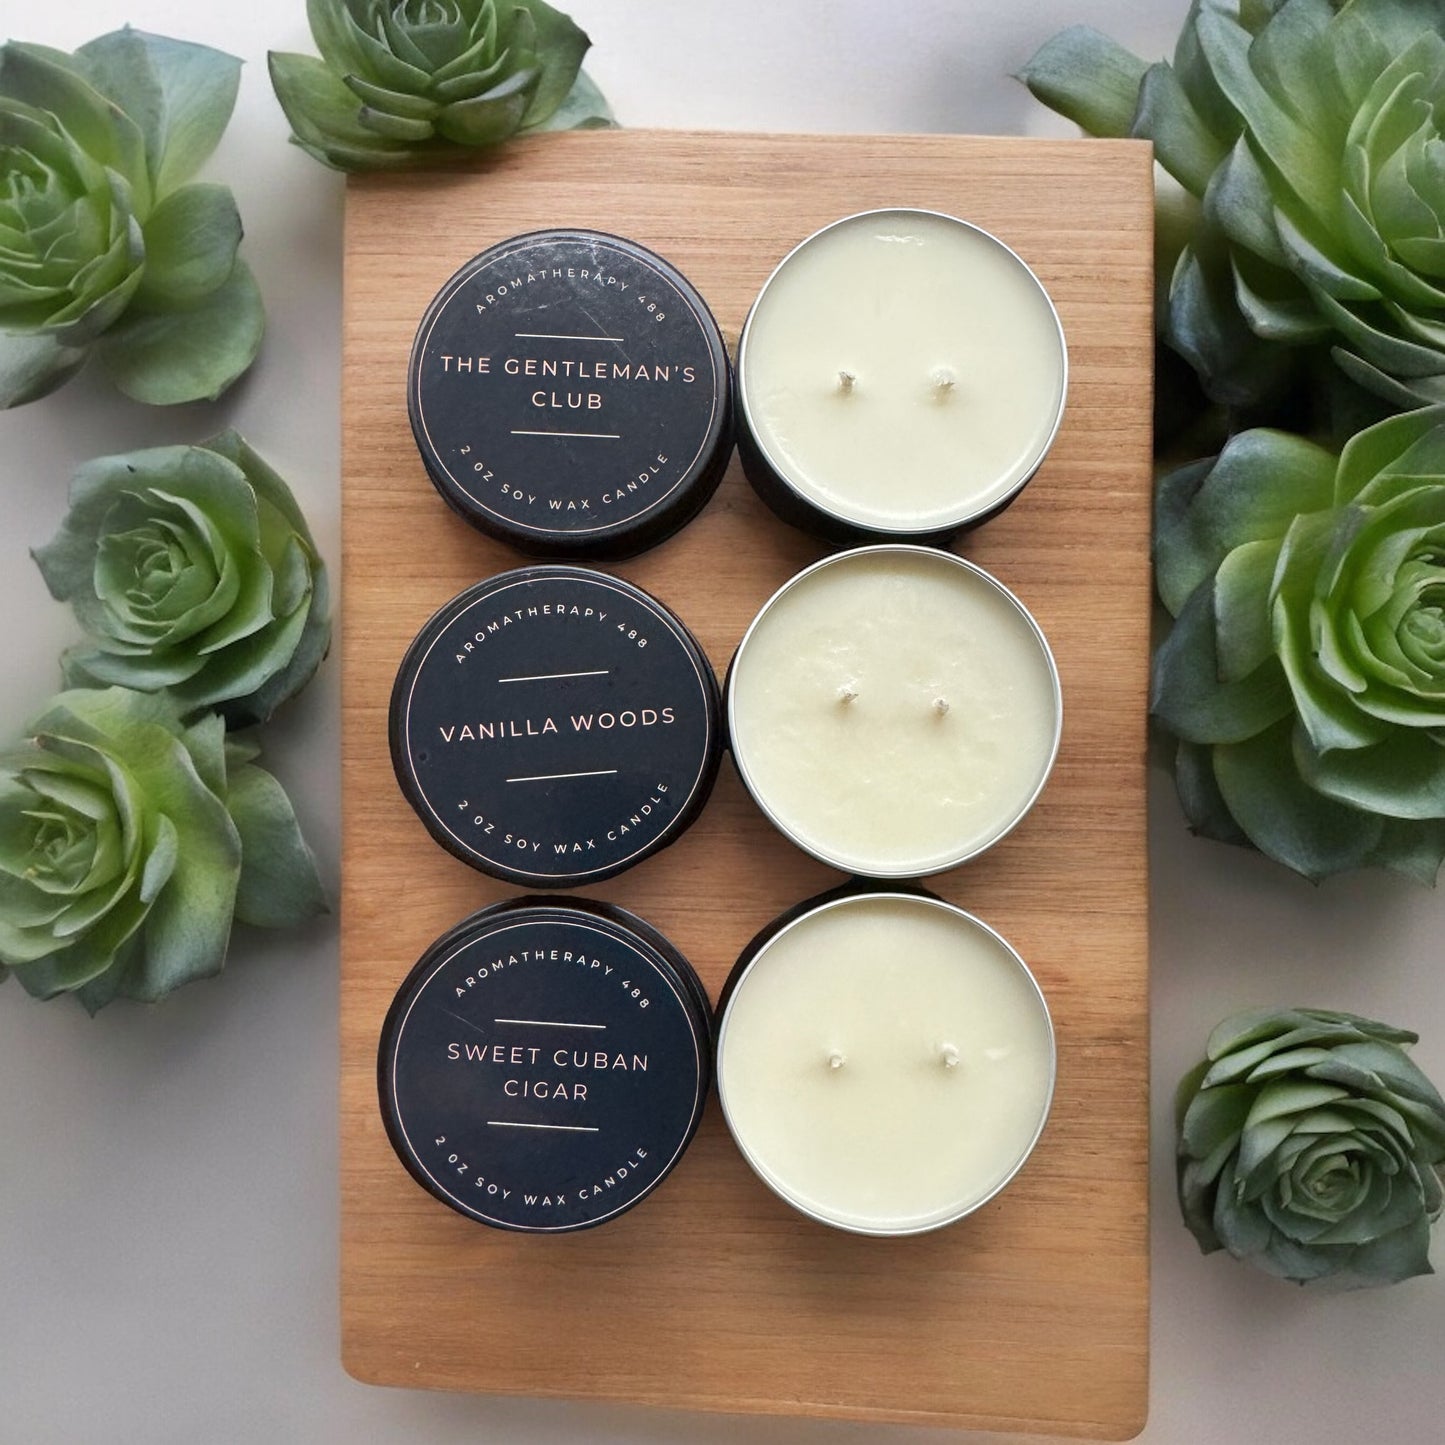 2 oz Candle | Aromatherapy 488 | Handcrafted | Travel Safe | Hand Poured Natural Soy Wax | High Quality Eco-Friendly | Luxury | Aromatherapy Candle for Relaxation